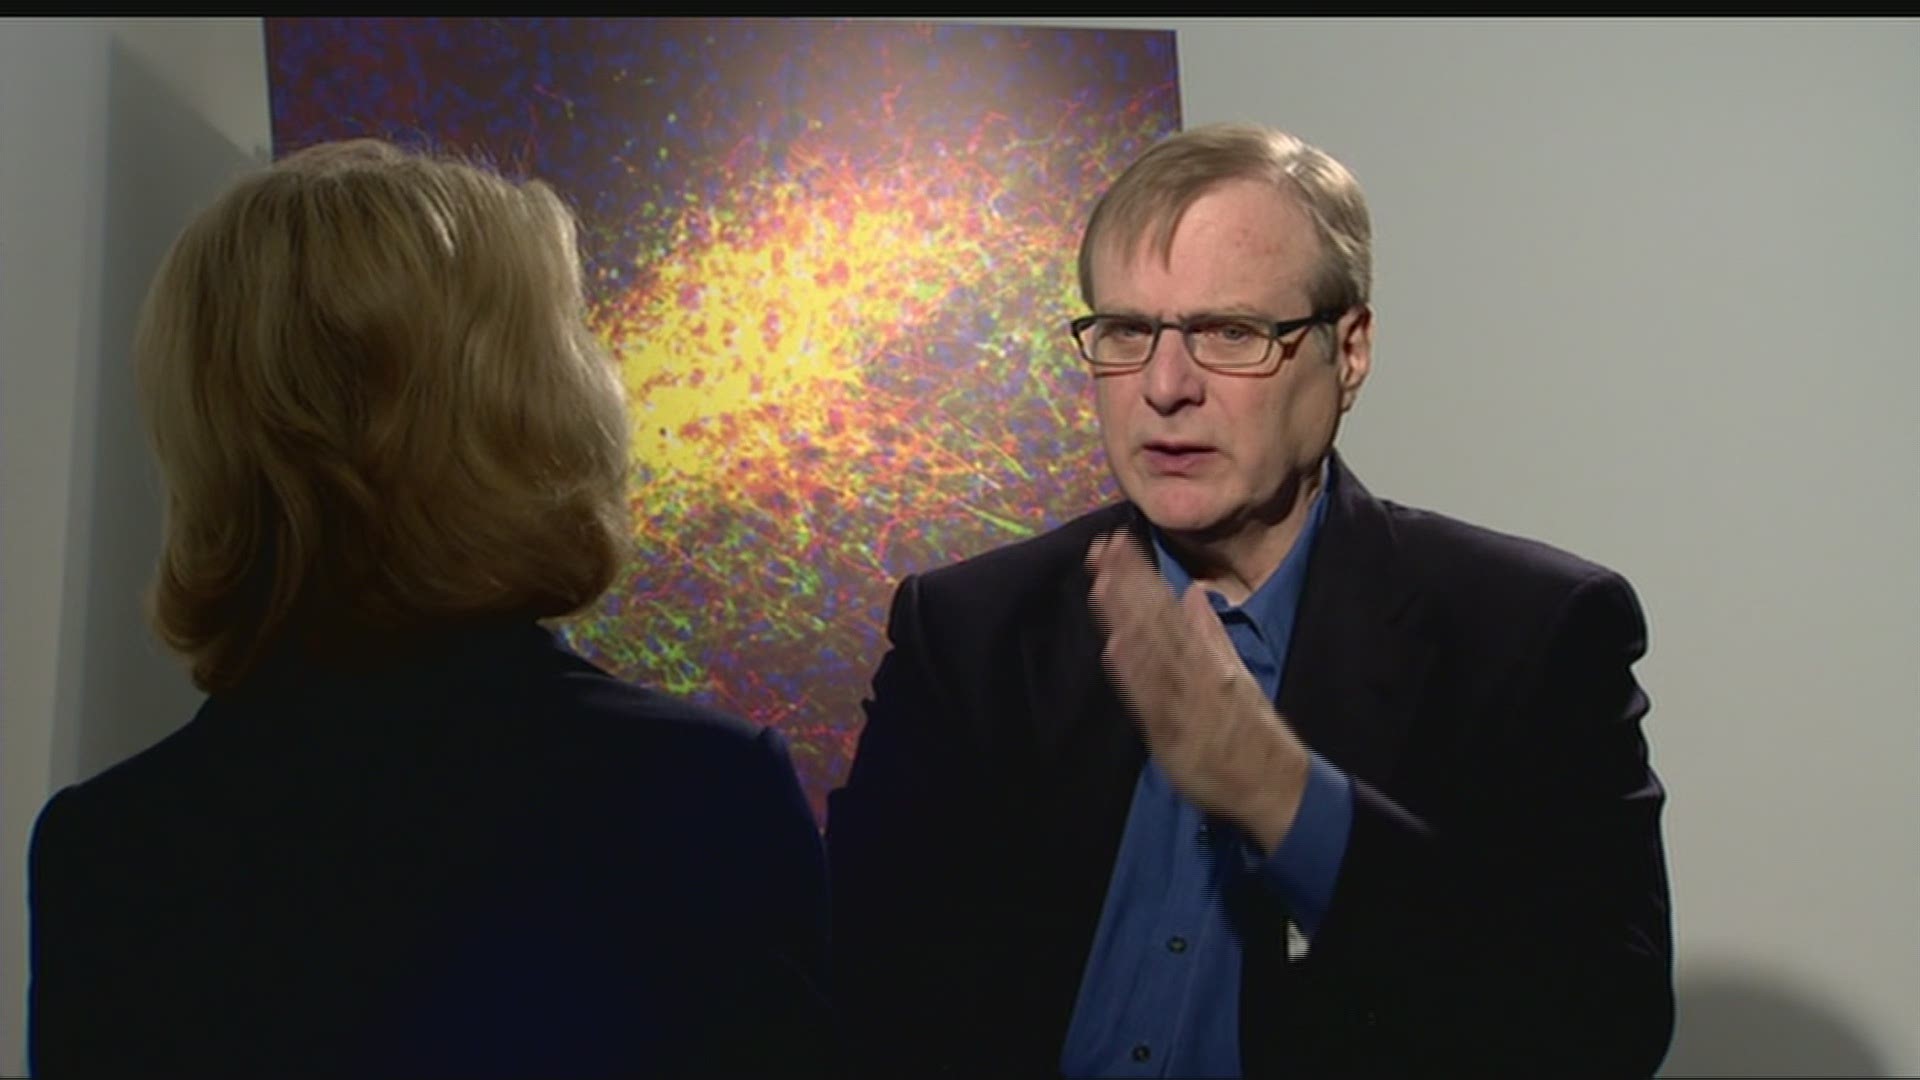 Paul Allen spoke with KING 5's Jean Enersen in an exclusive interview after he donated $300 million to his Allen Institute for Brain Science. Allen died from complications associated with non-Hodgkin's lymphoma. He was 65.